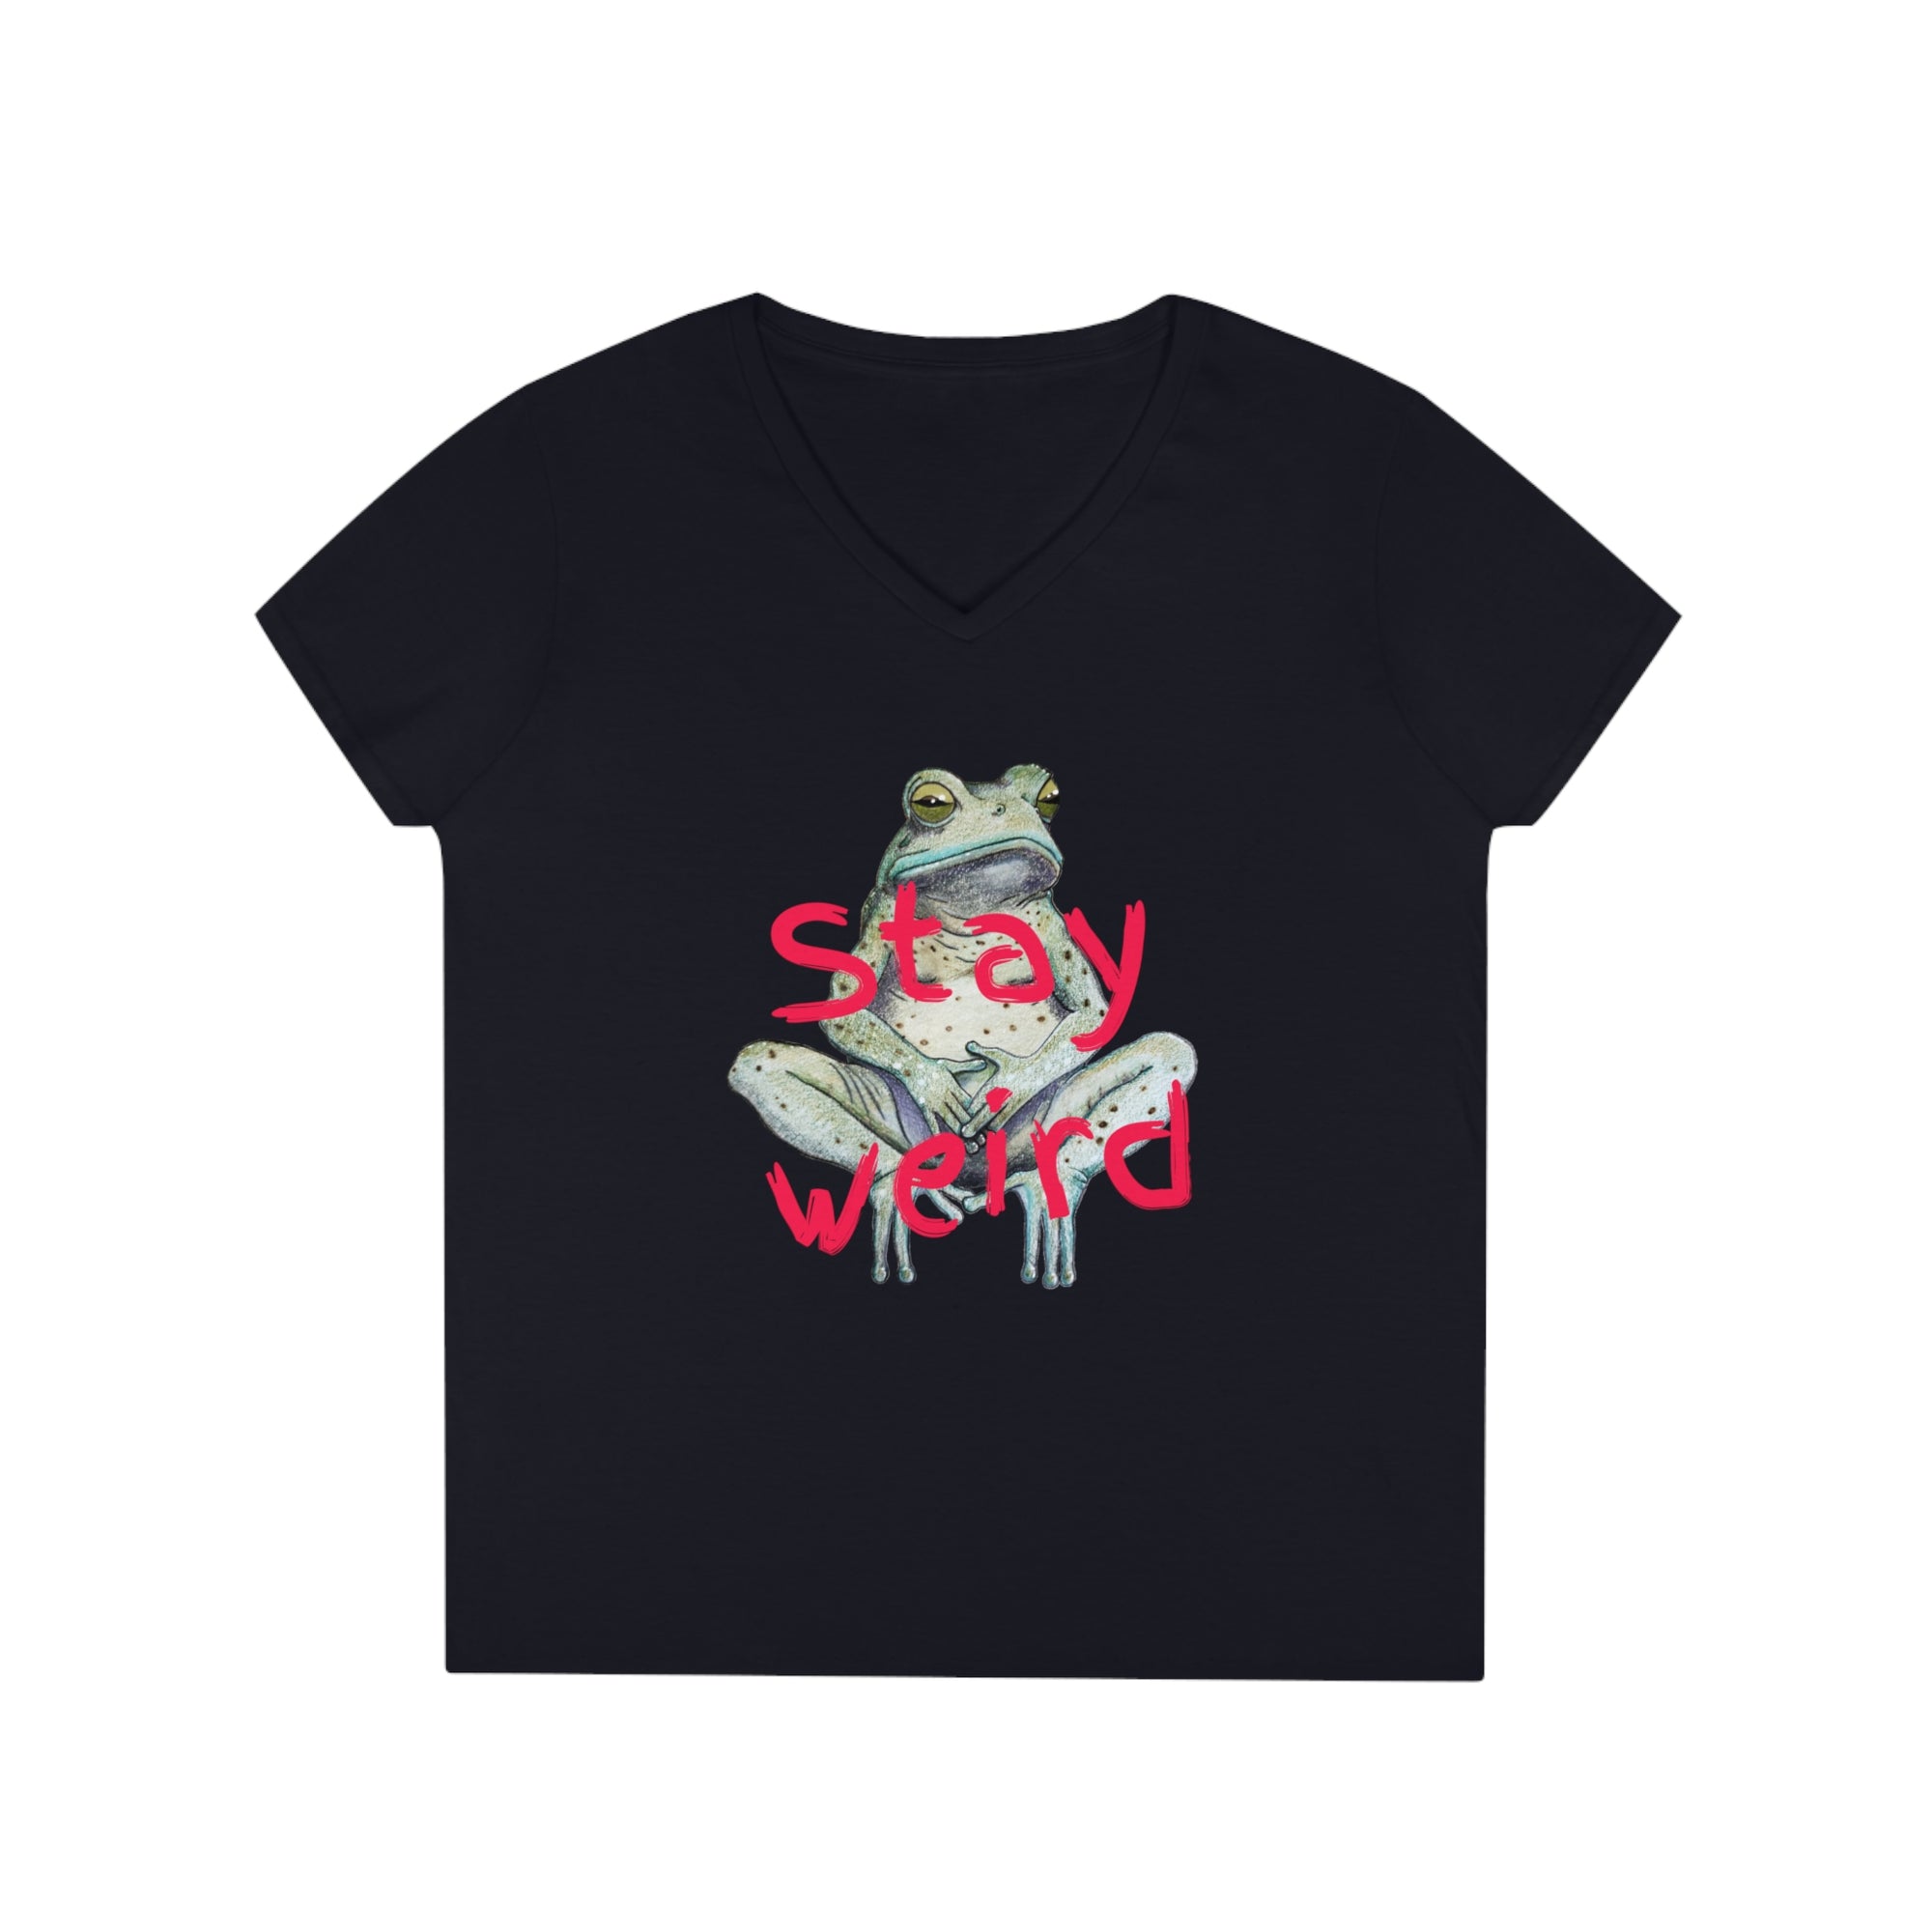 Stay Weird Fitted V Tee